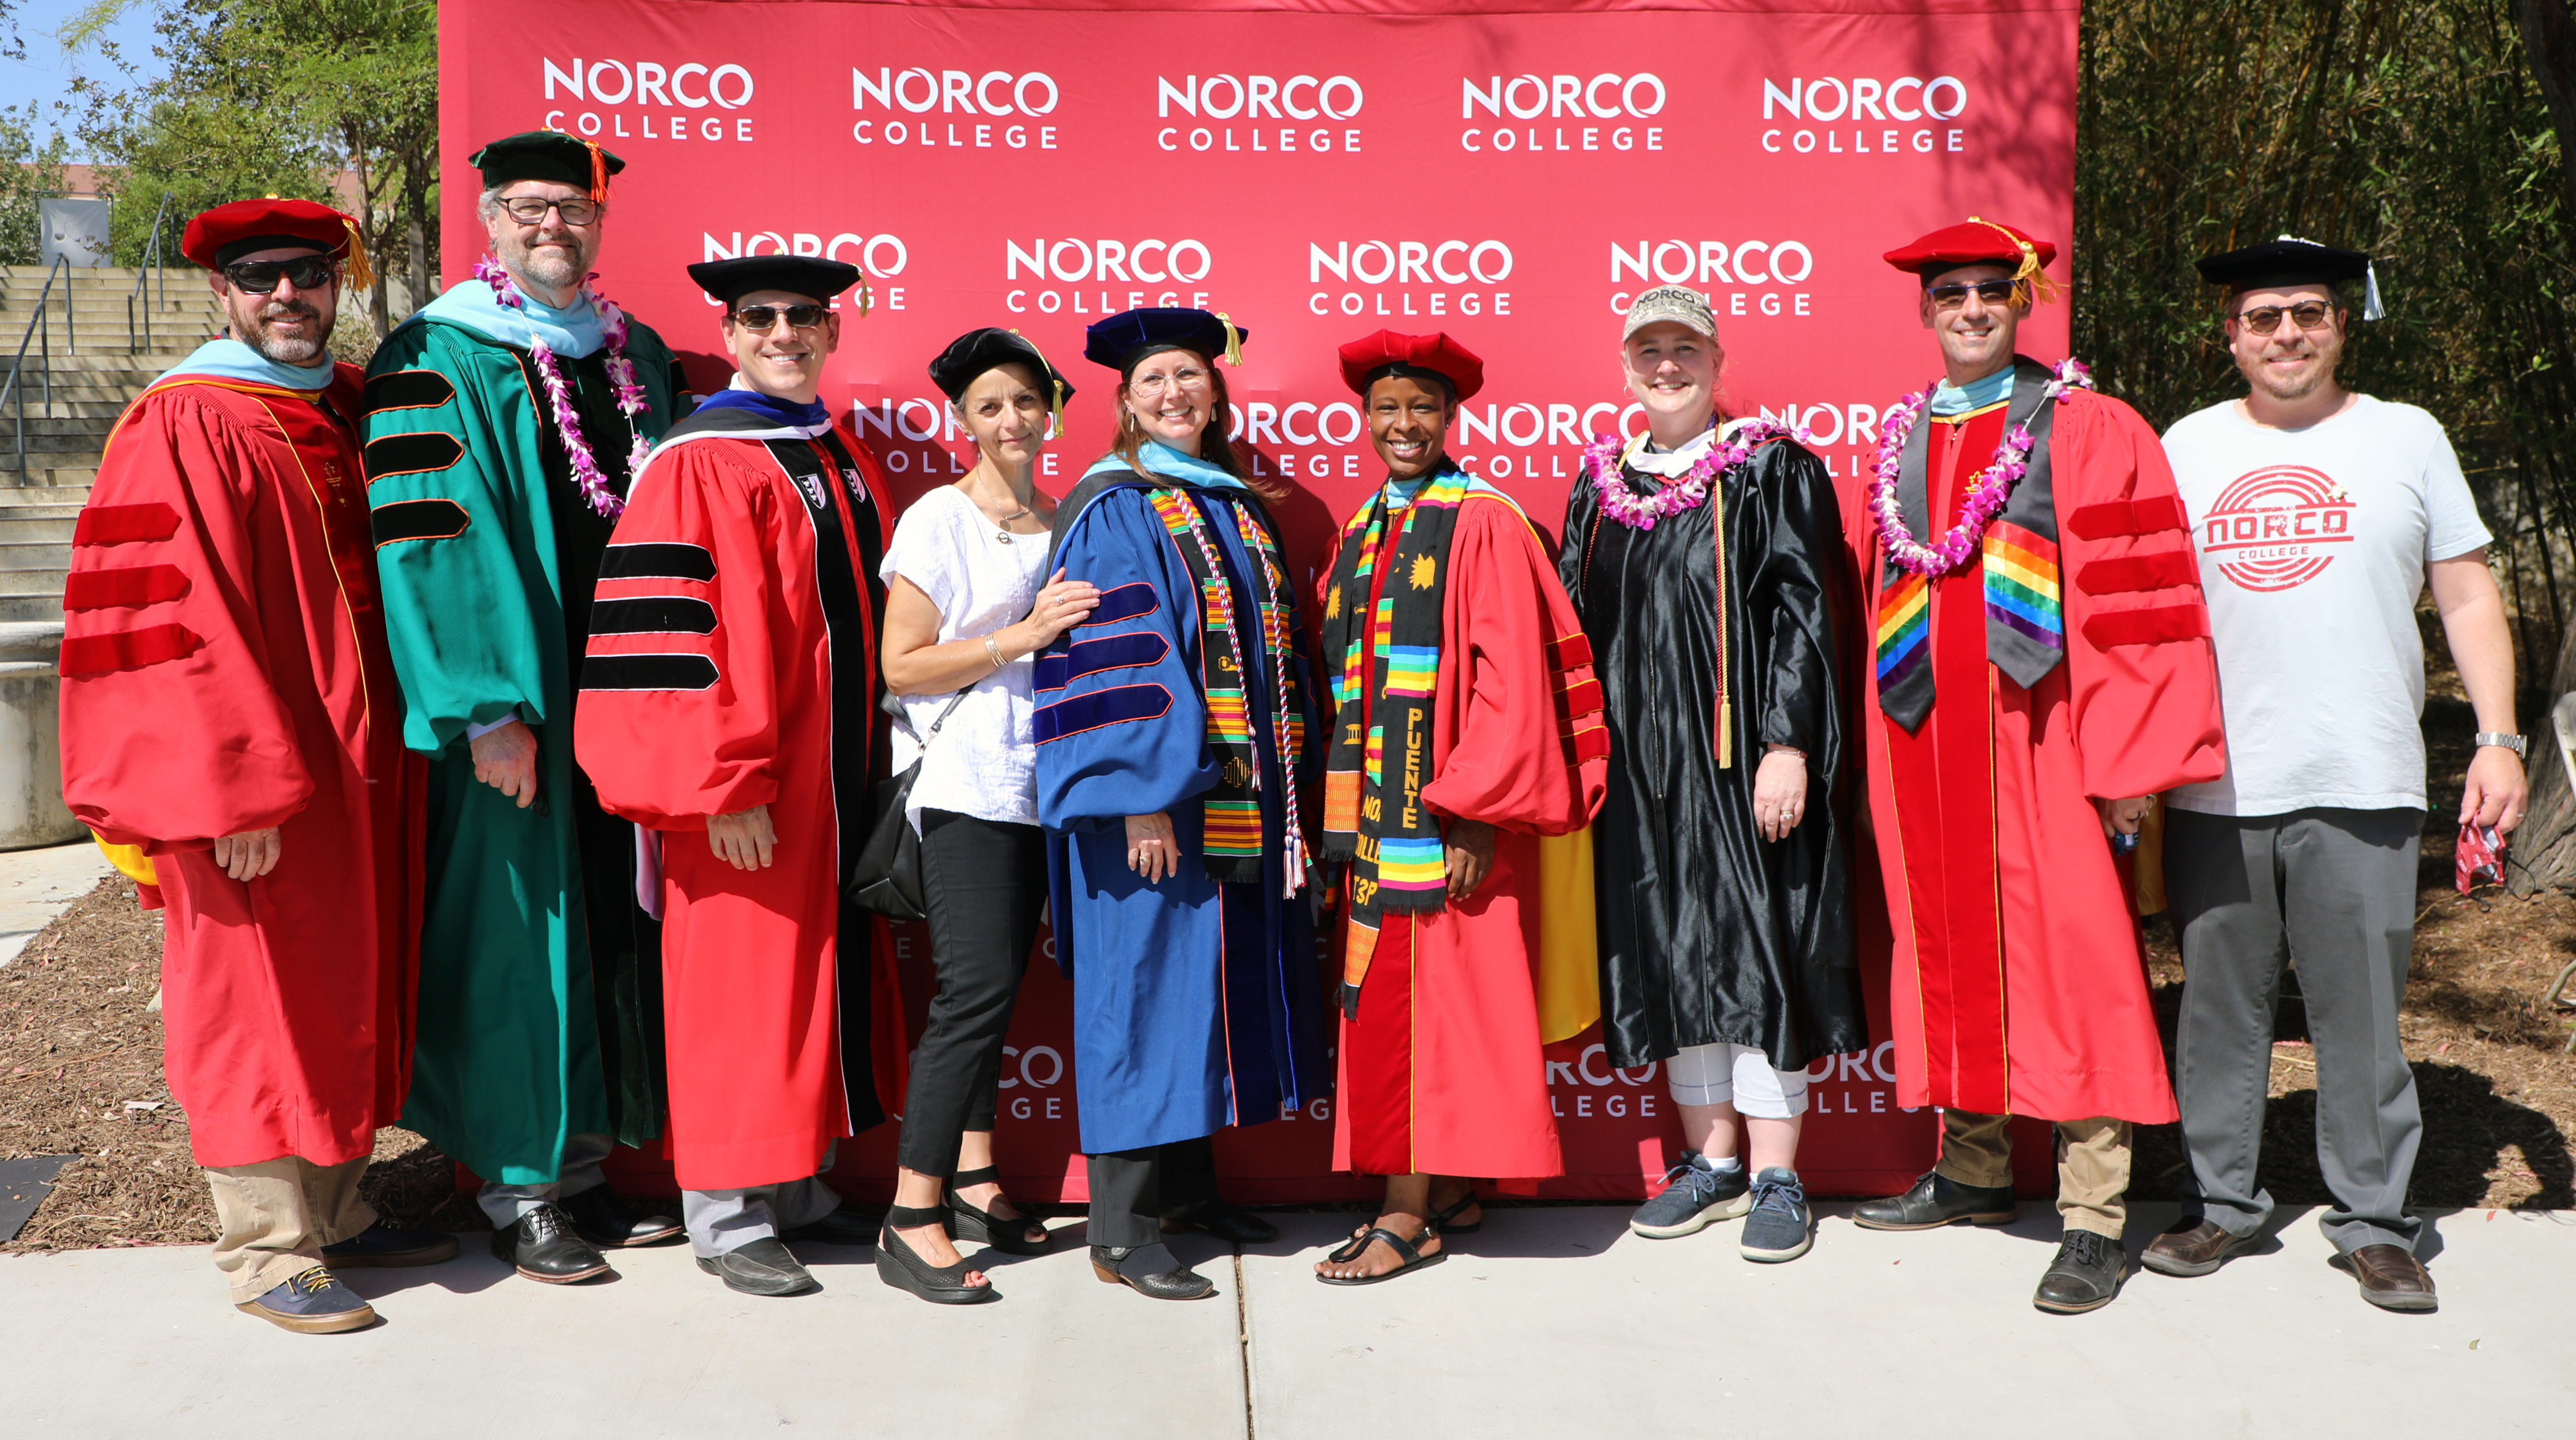 Norco College Leadership